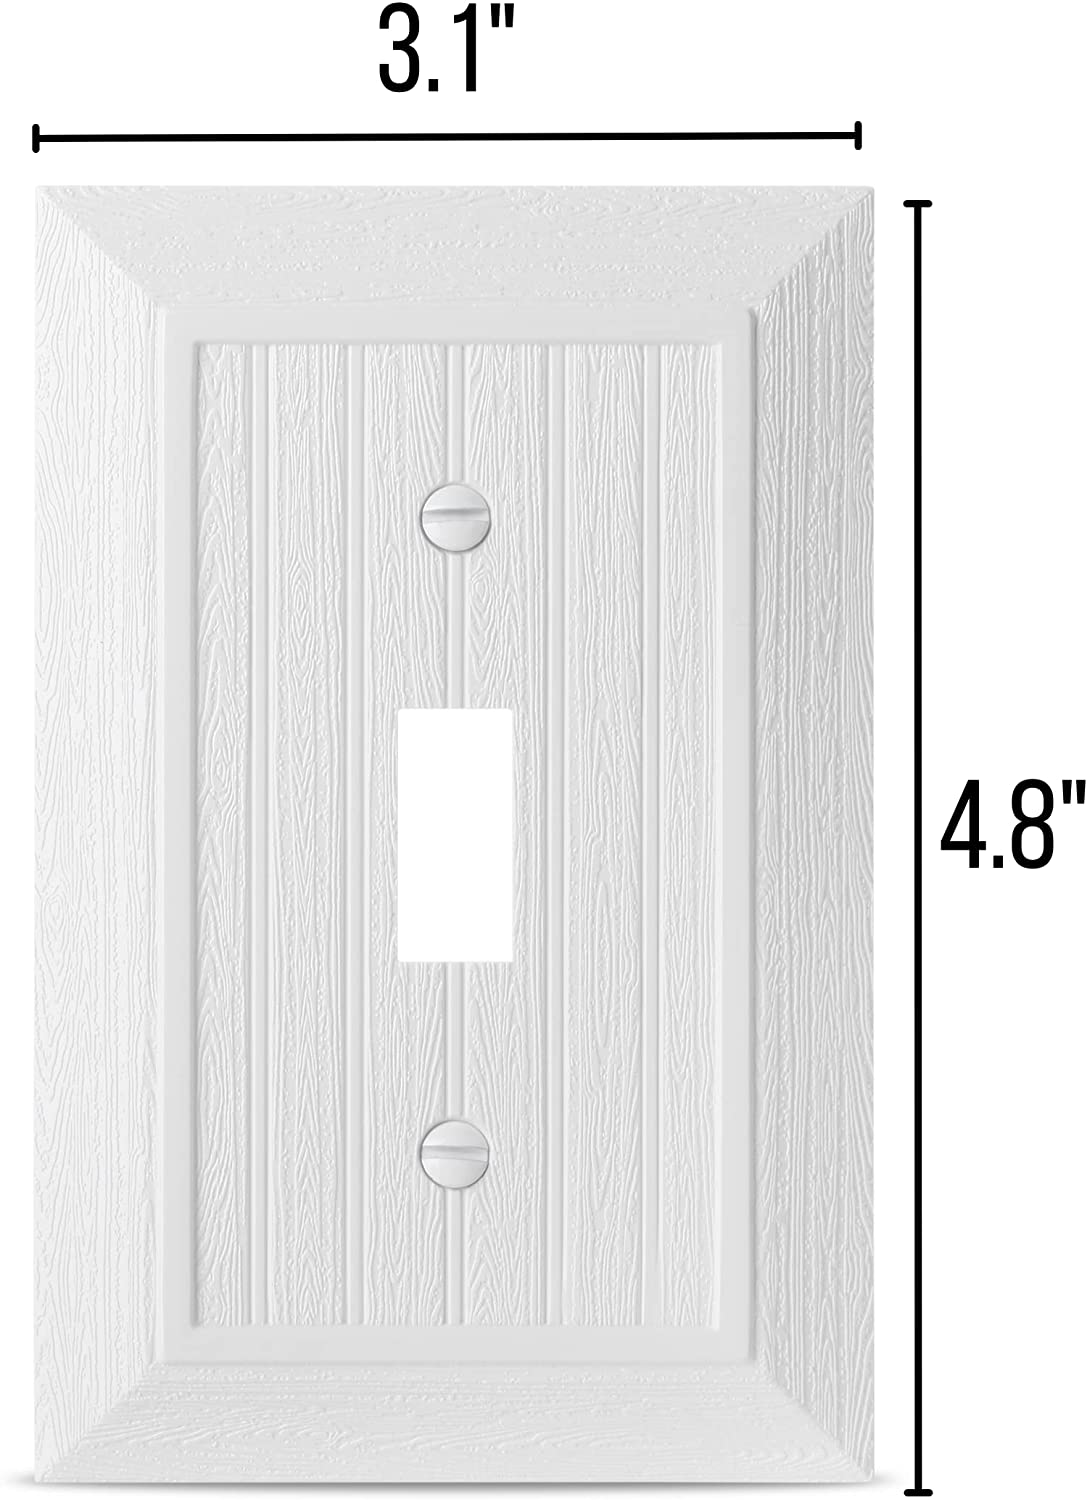 Wall Switch Plate Er